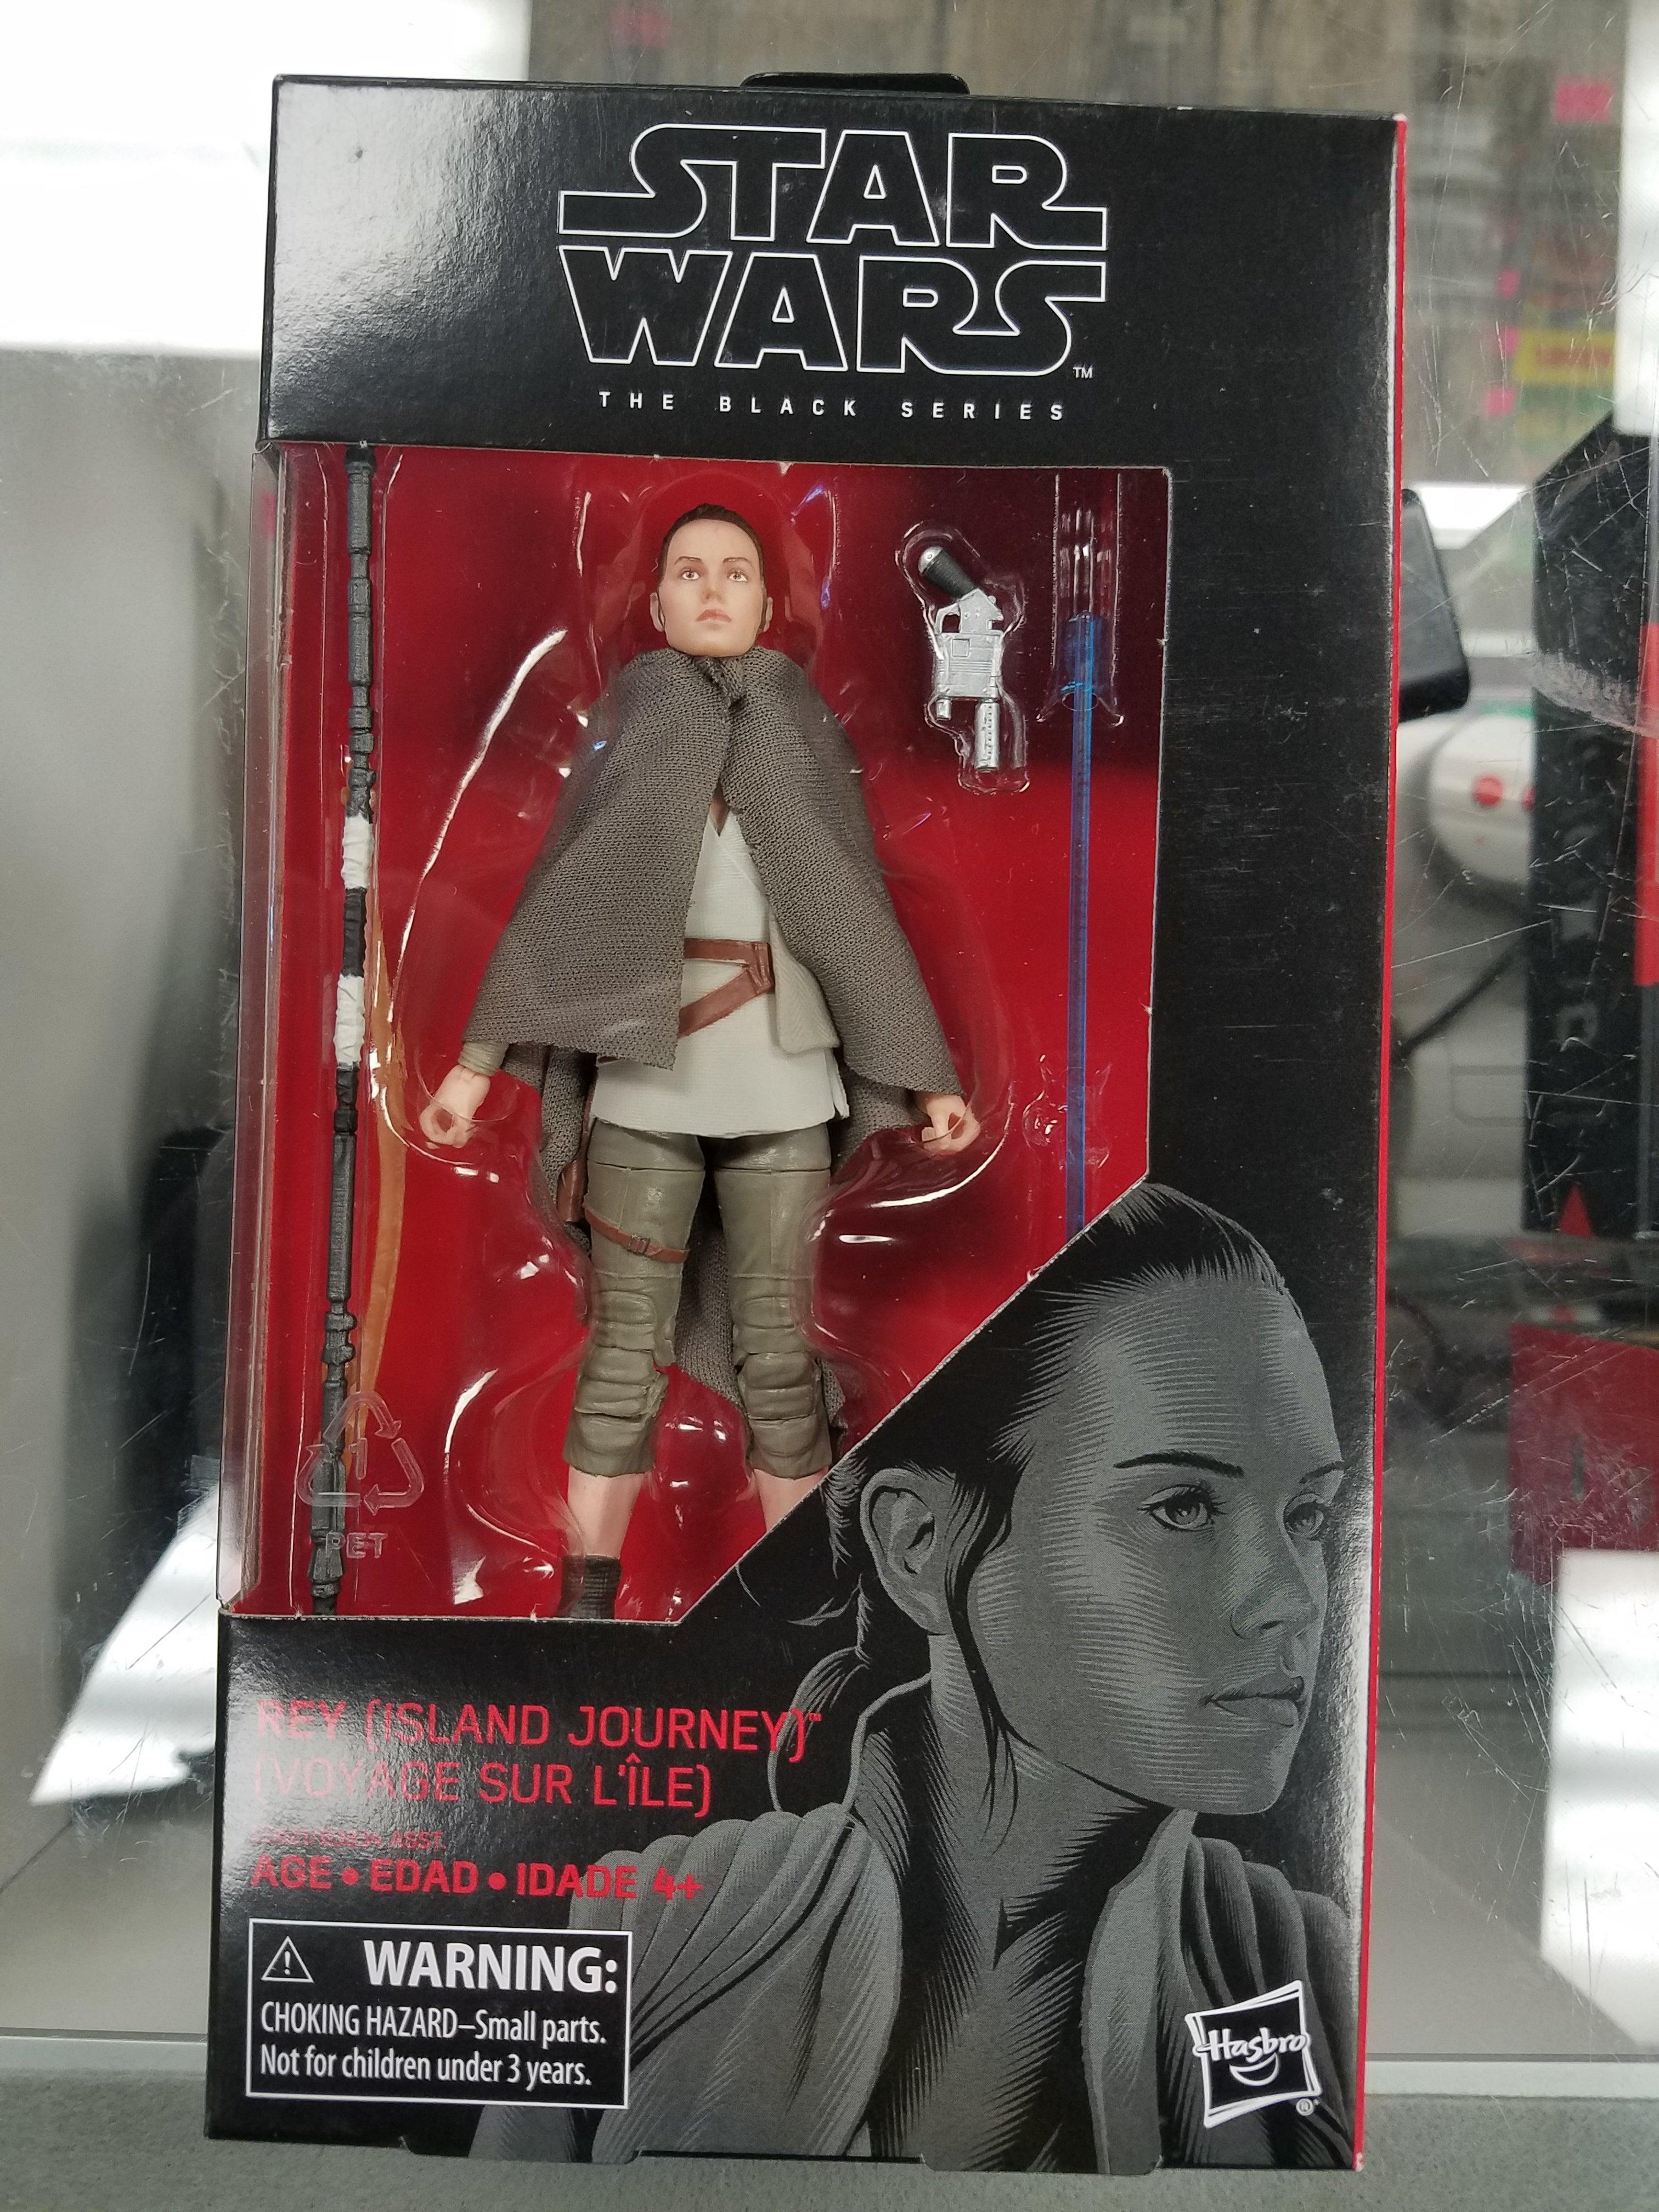 Star Wars The Black Series Rey (Island Journey) - Rogue Toys